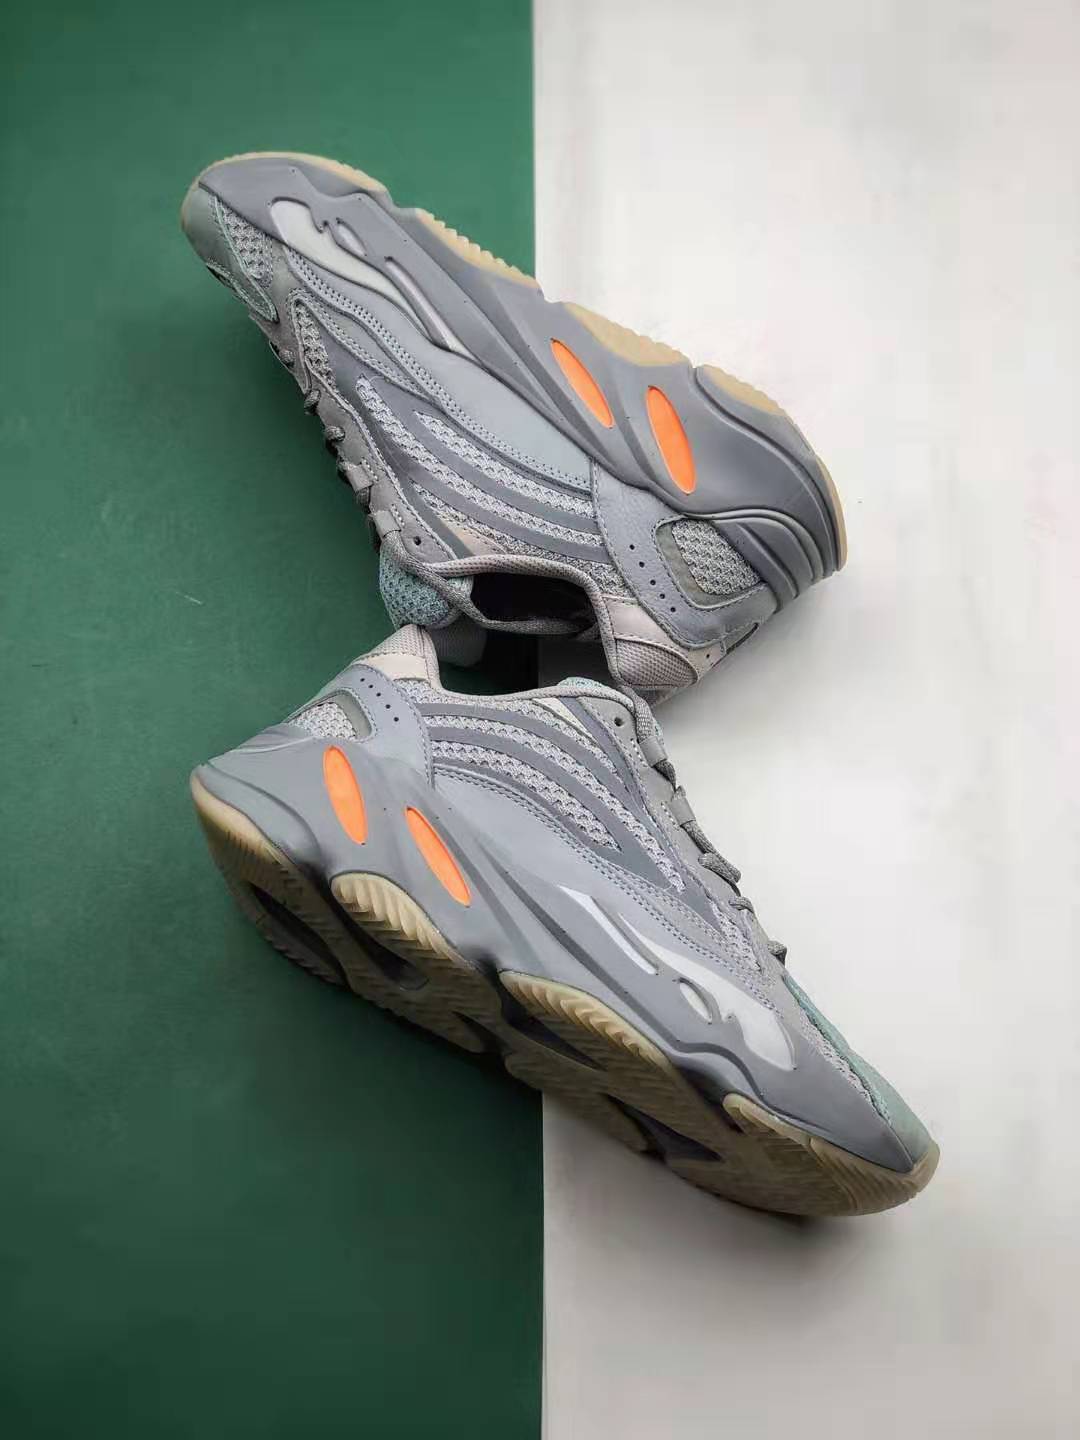 Adidas Yeezy Boost 700 'Wave Runner' B75571 - Top-Notch Sneakers for Ultimate Style and Comfort